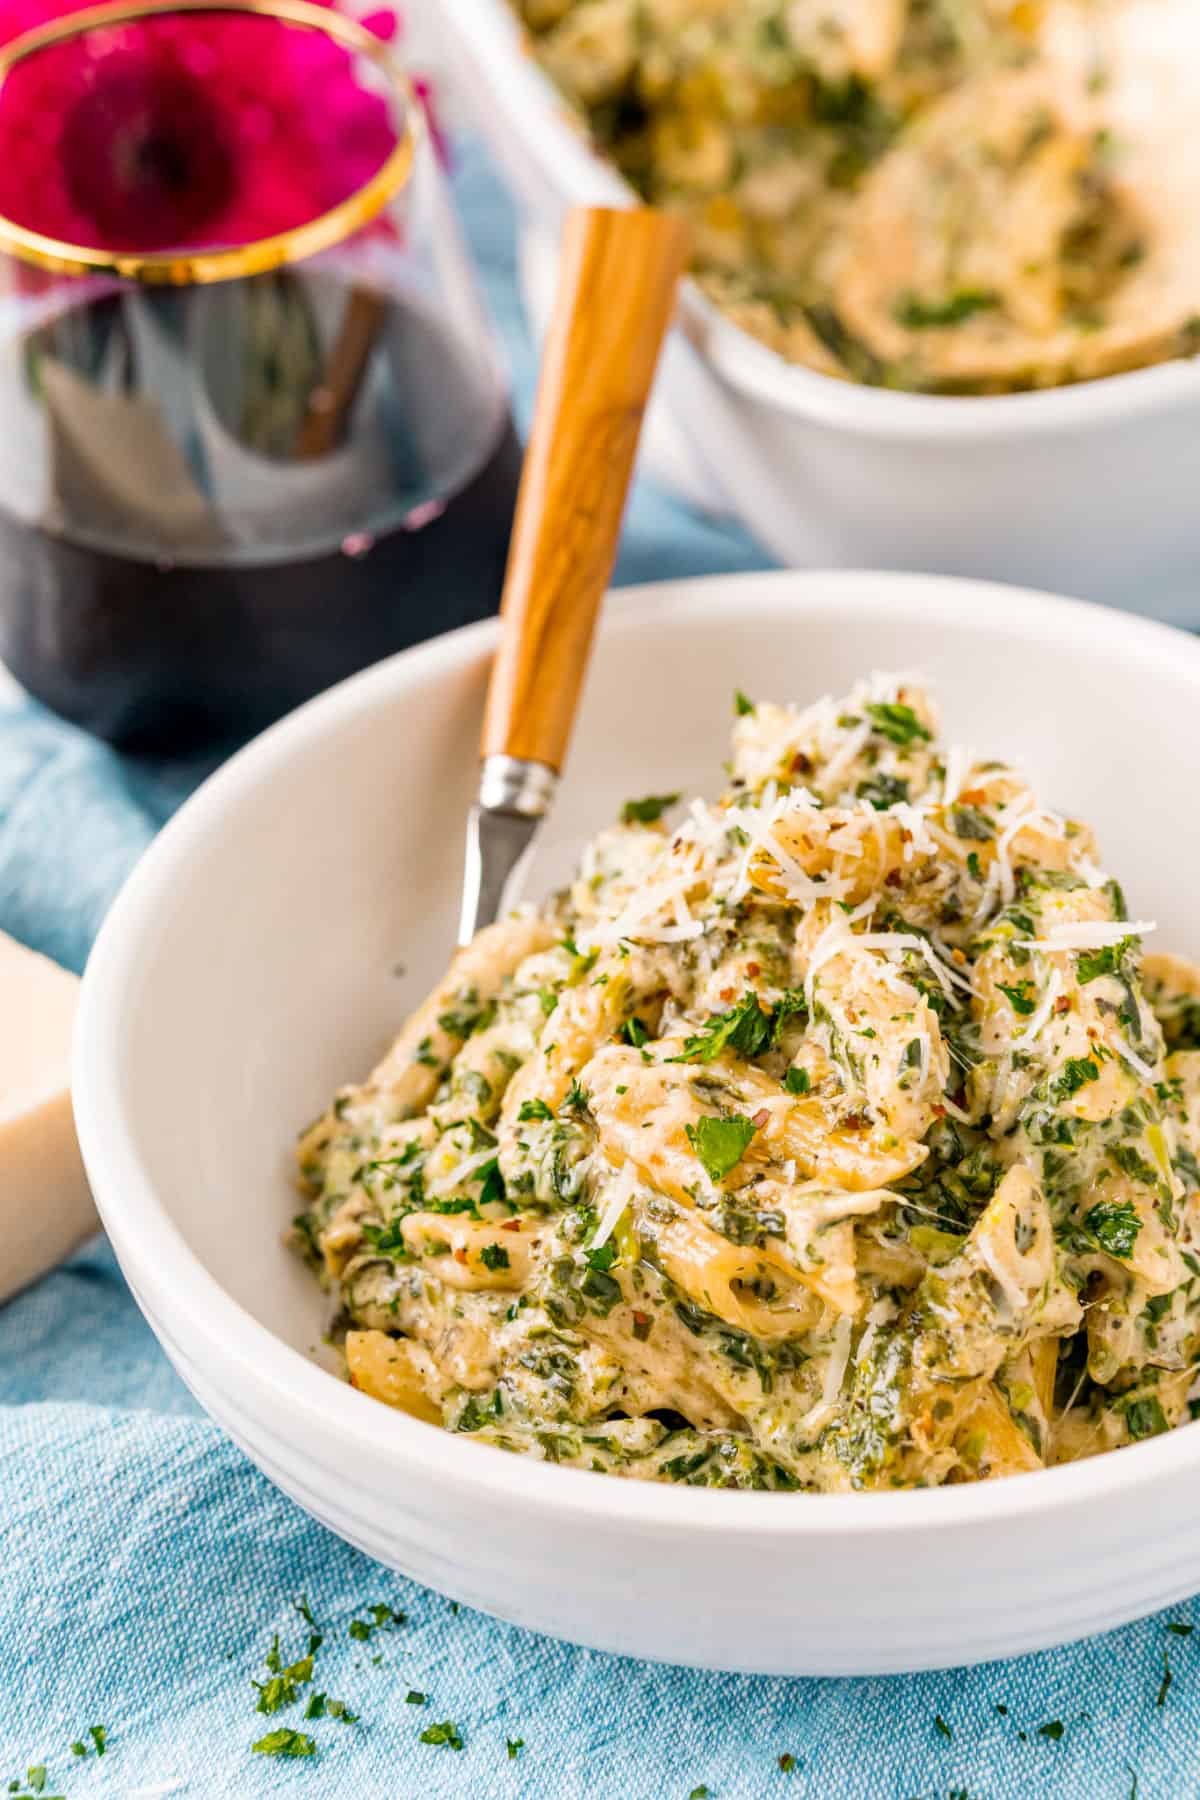 Spinach alfredo pasta served in a bowl.